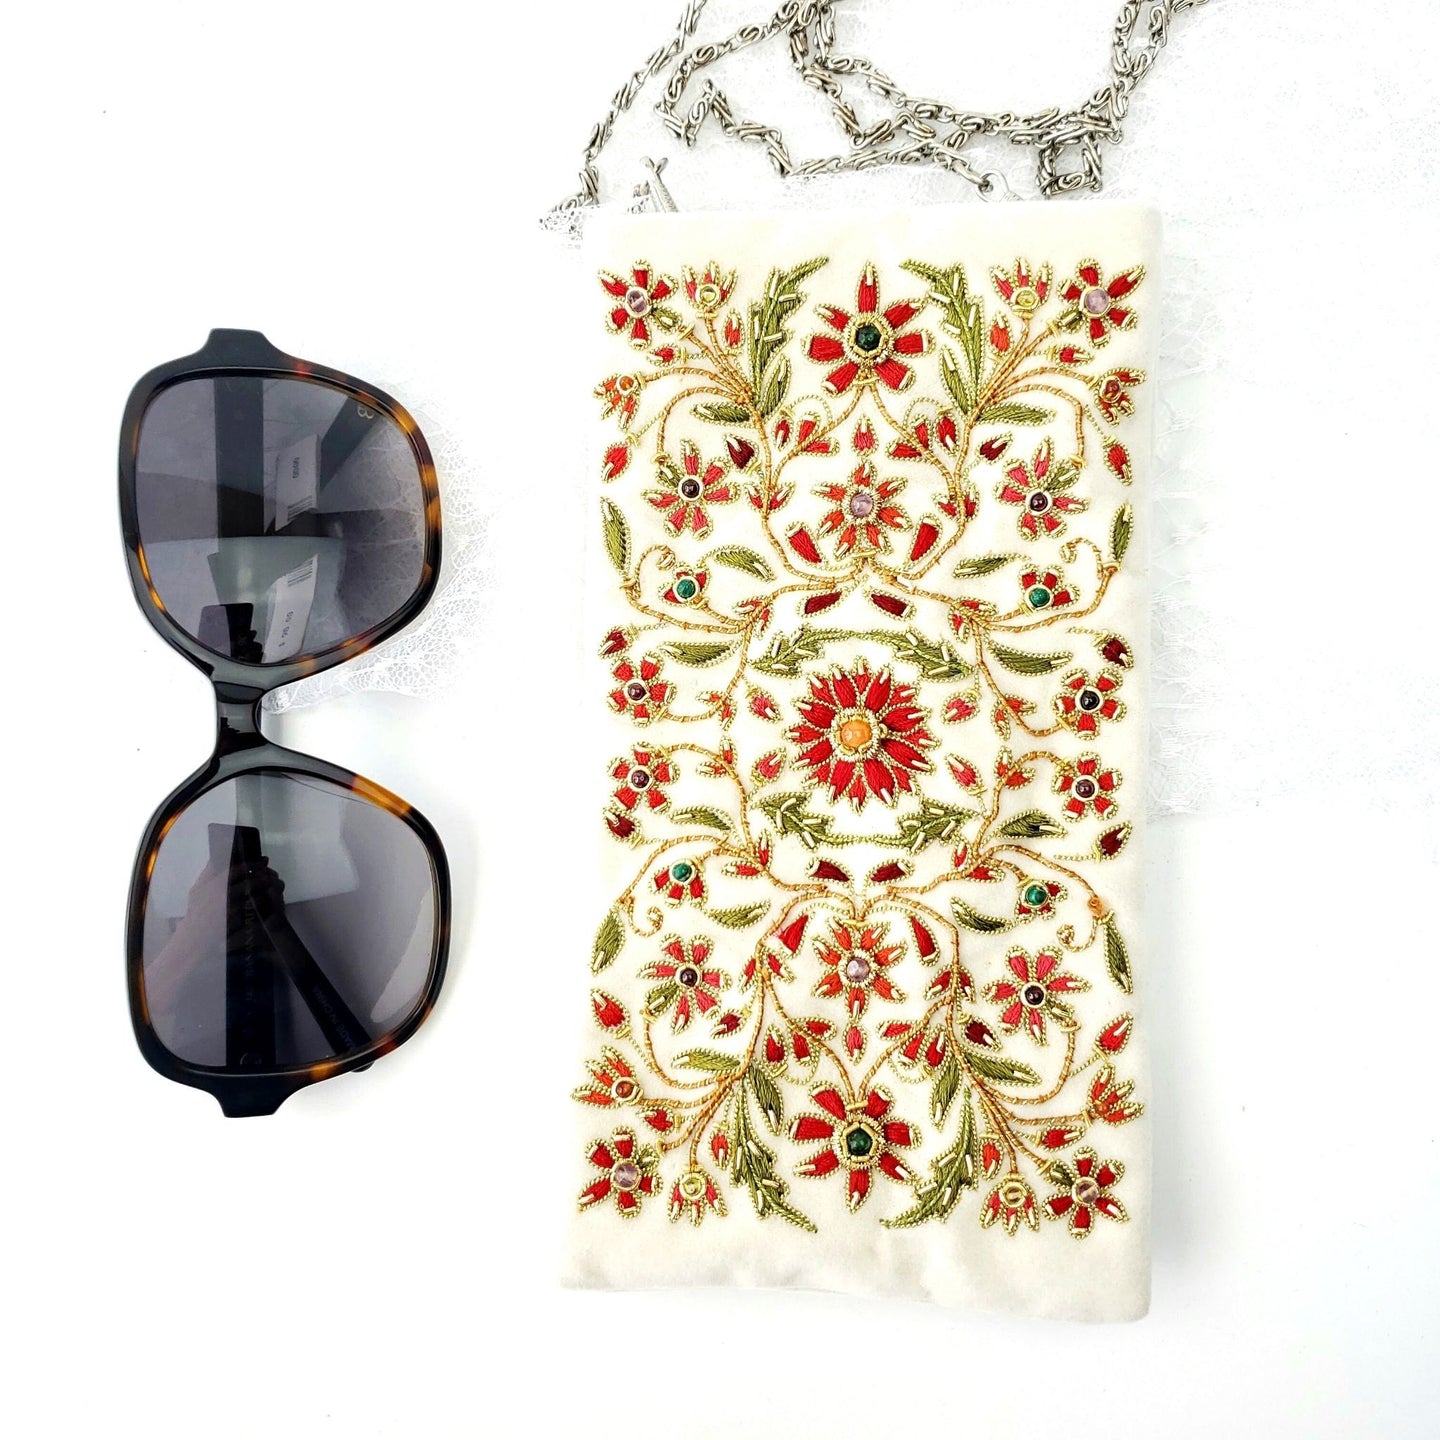 Ivory velvet soft glasses case embroidered with red flowers BoutiquebyMariam.